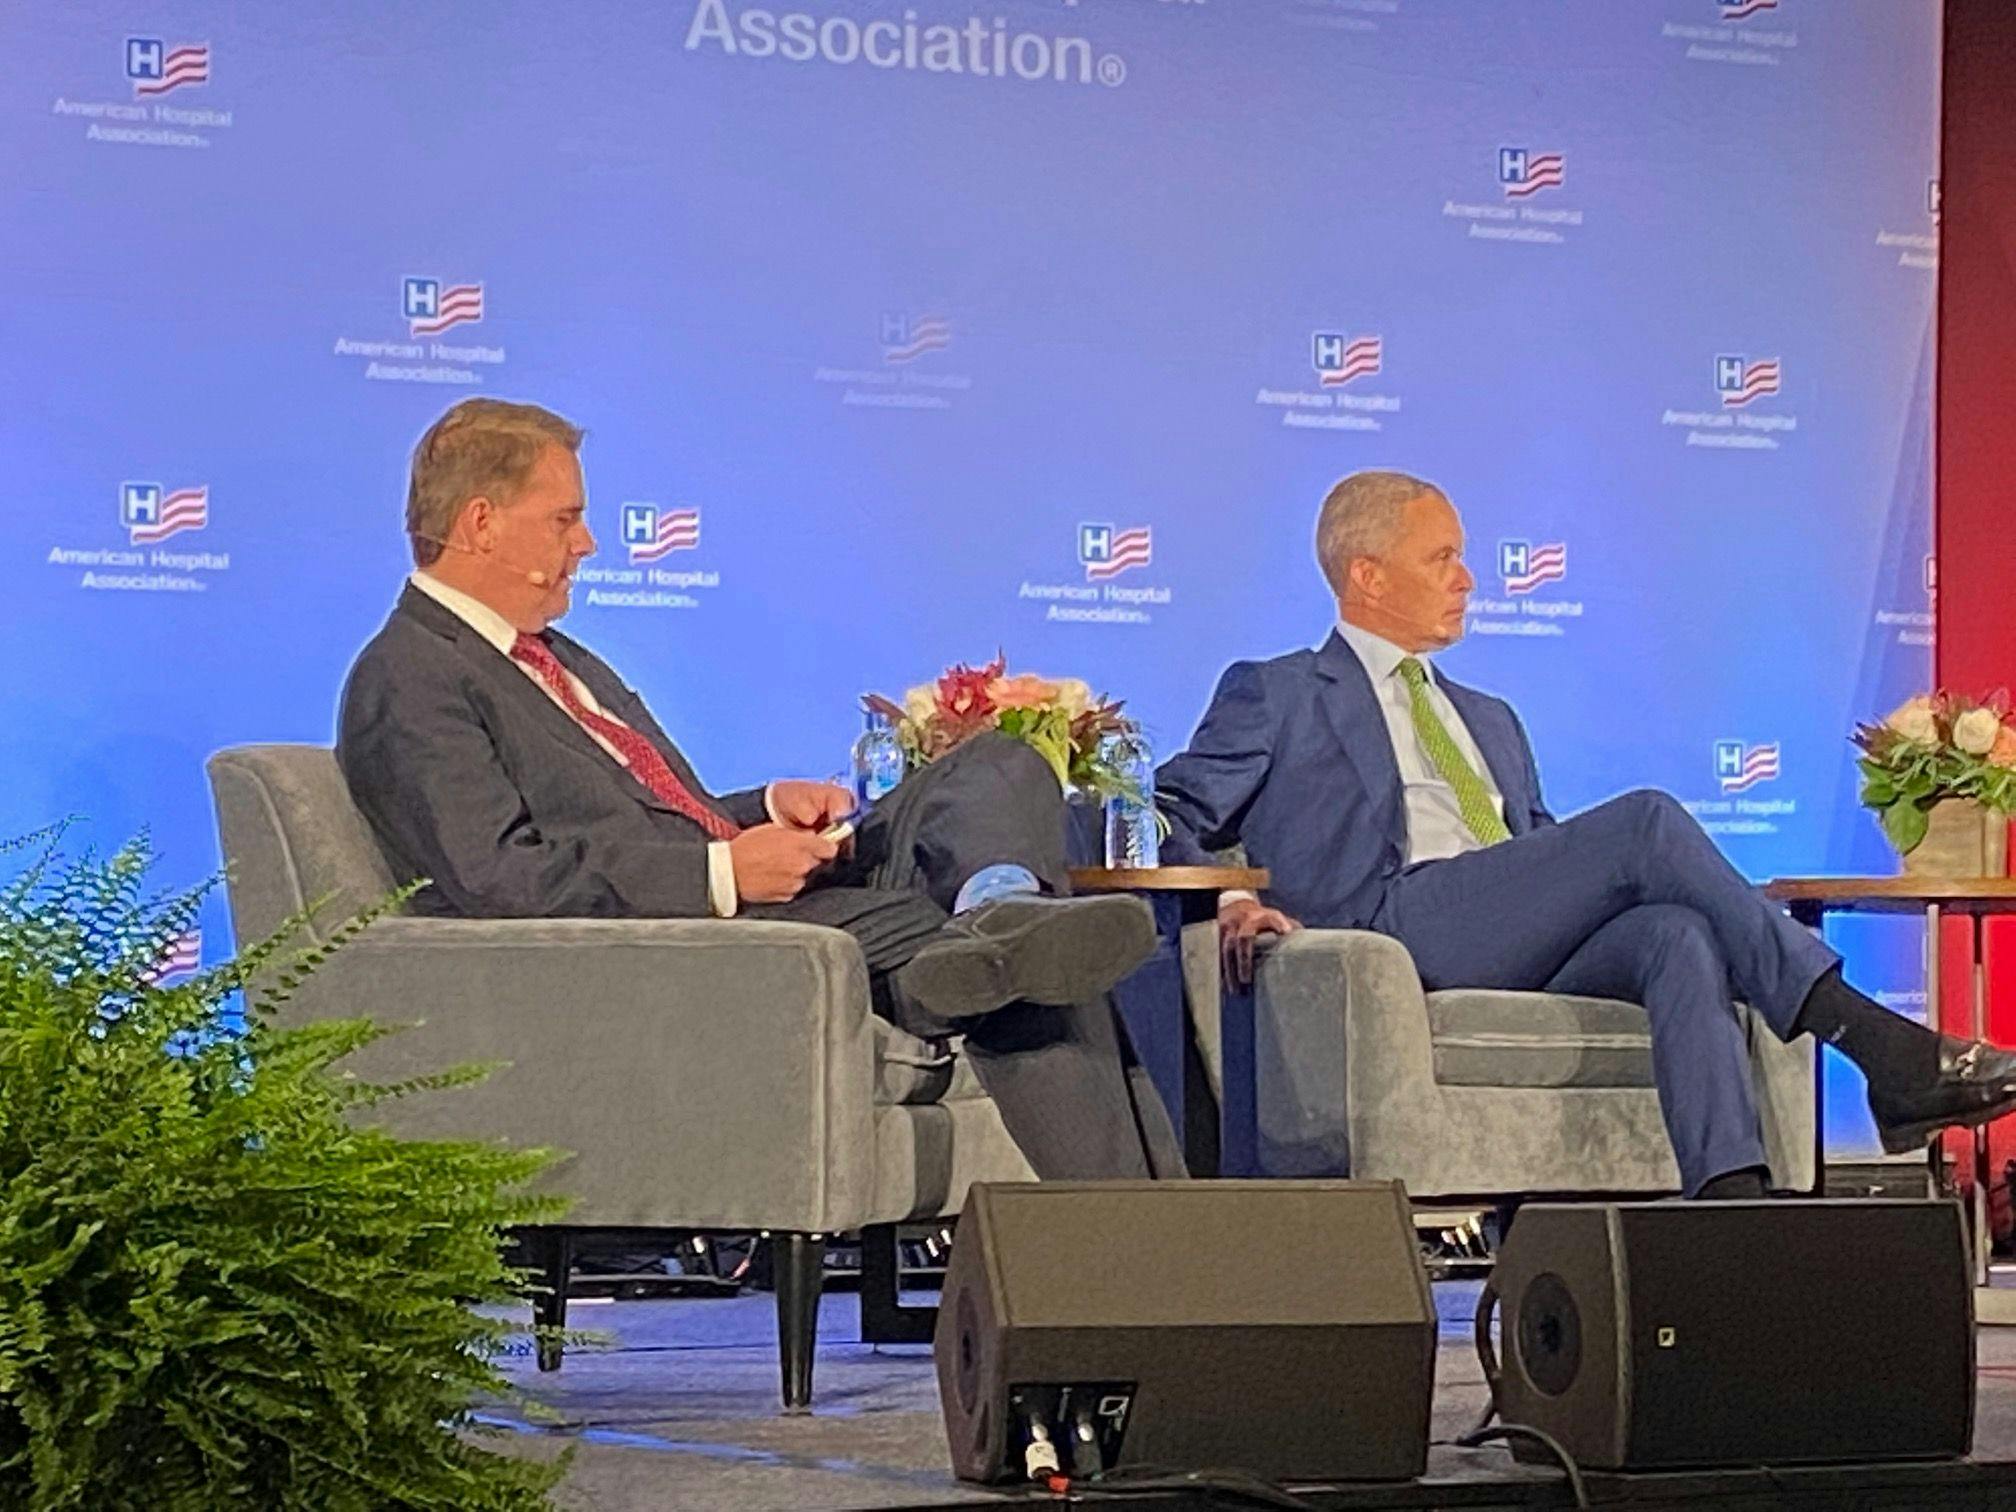 Harold Ford, Scott Jennings preview mid-term elections | American Hospital Association Leadership Summit